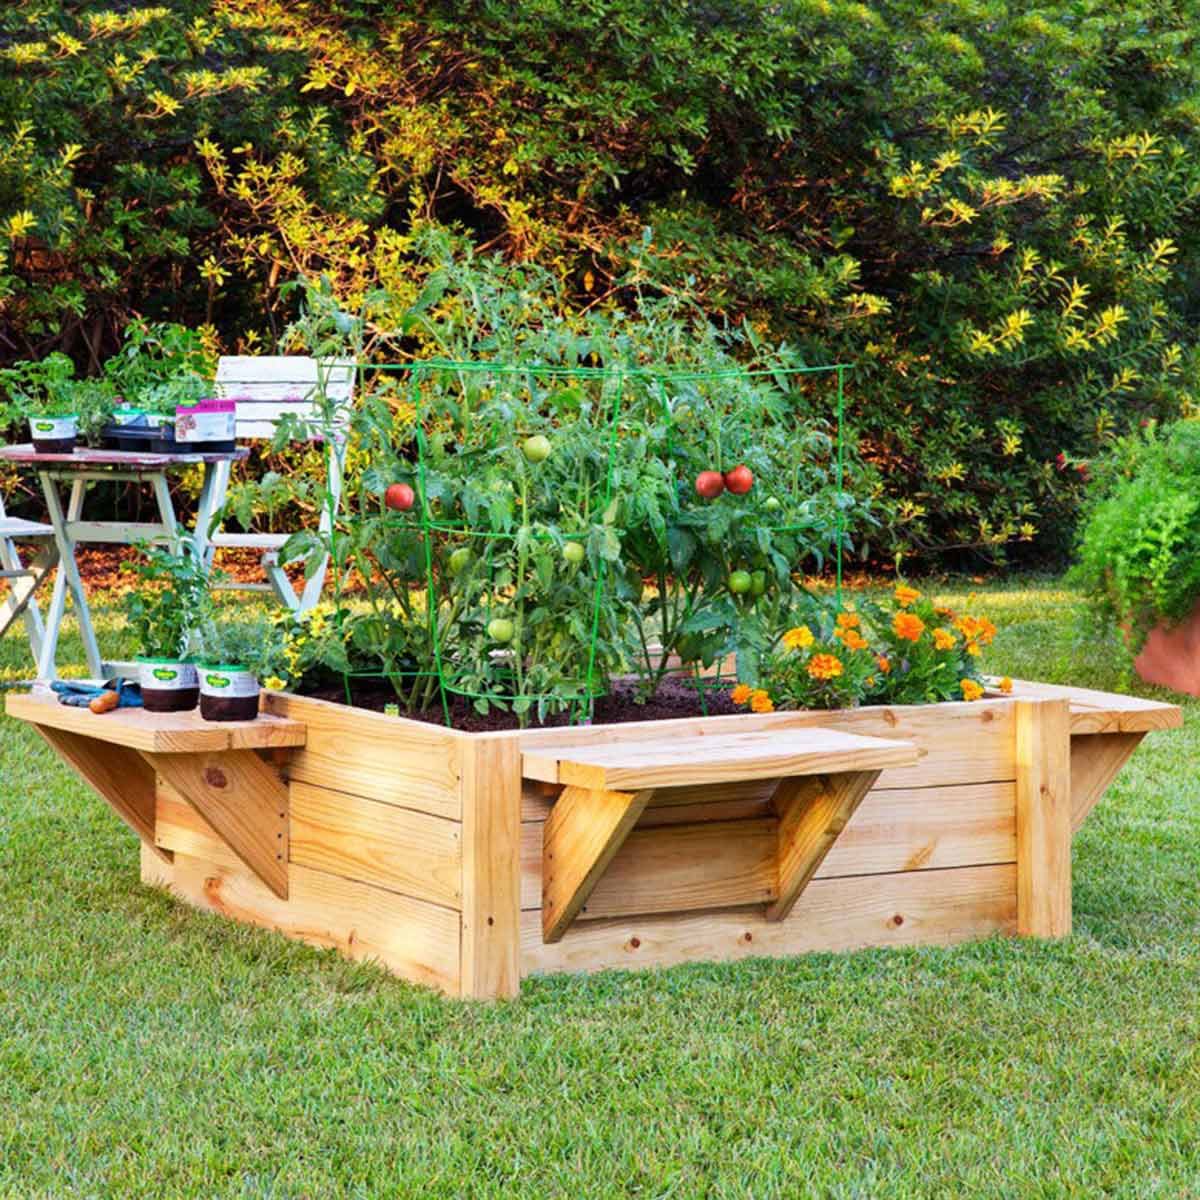 12 DIY Planter Boxes You Can Make in a Day